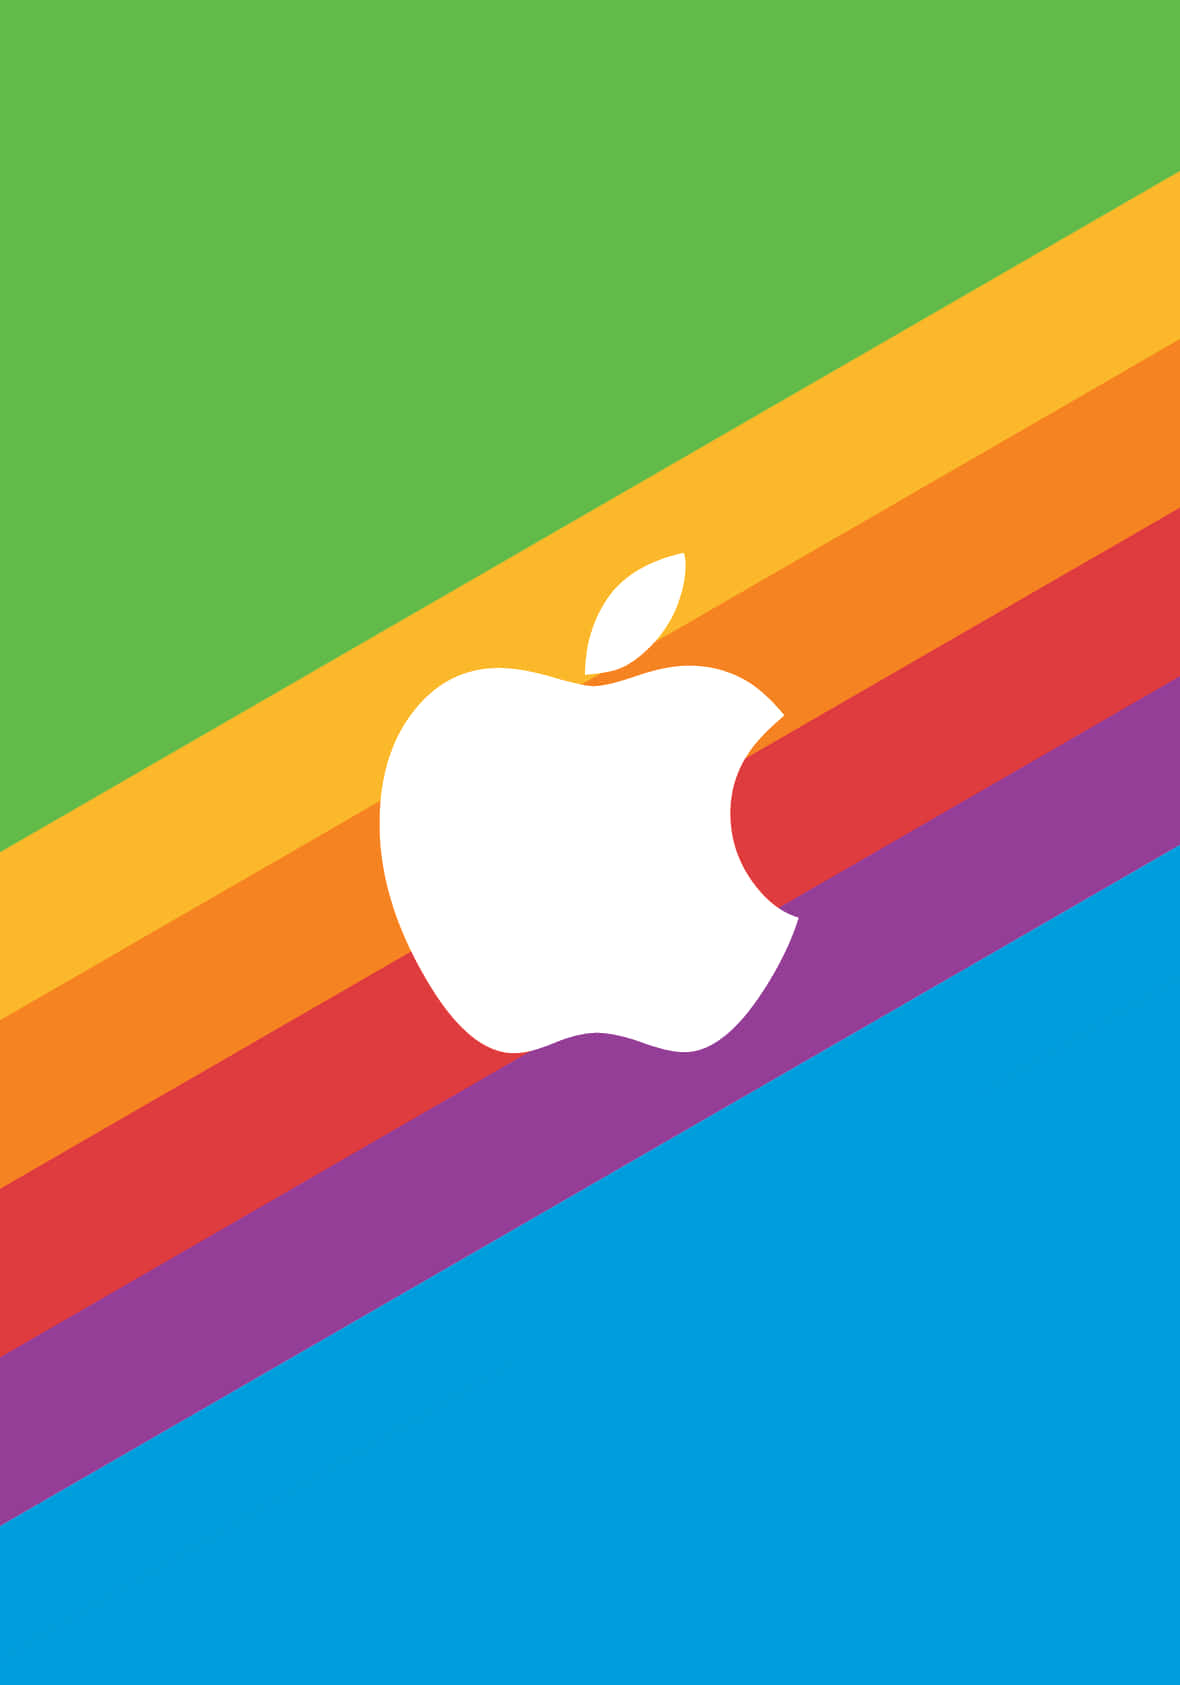 Apple Logo On A Colorful Background Wallpaper